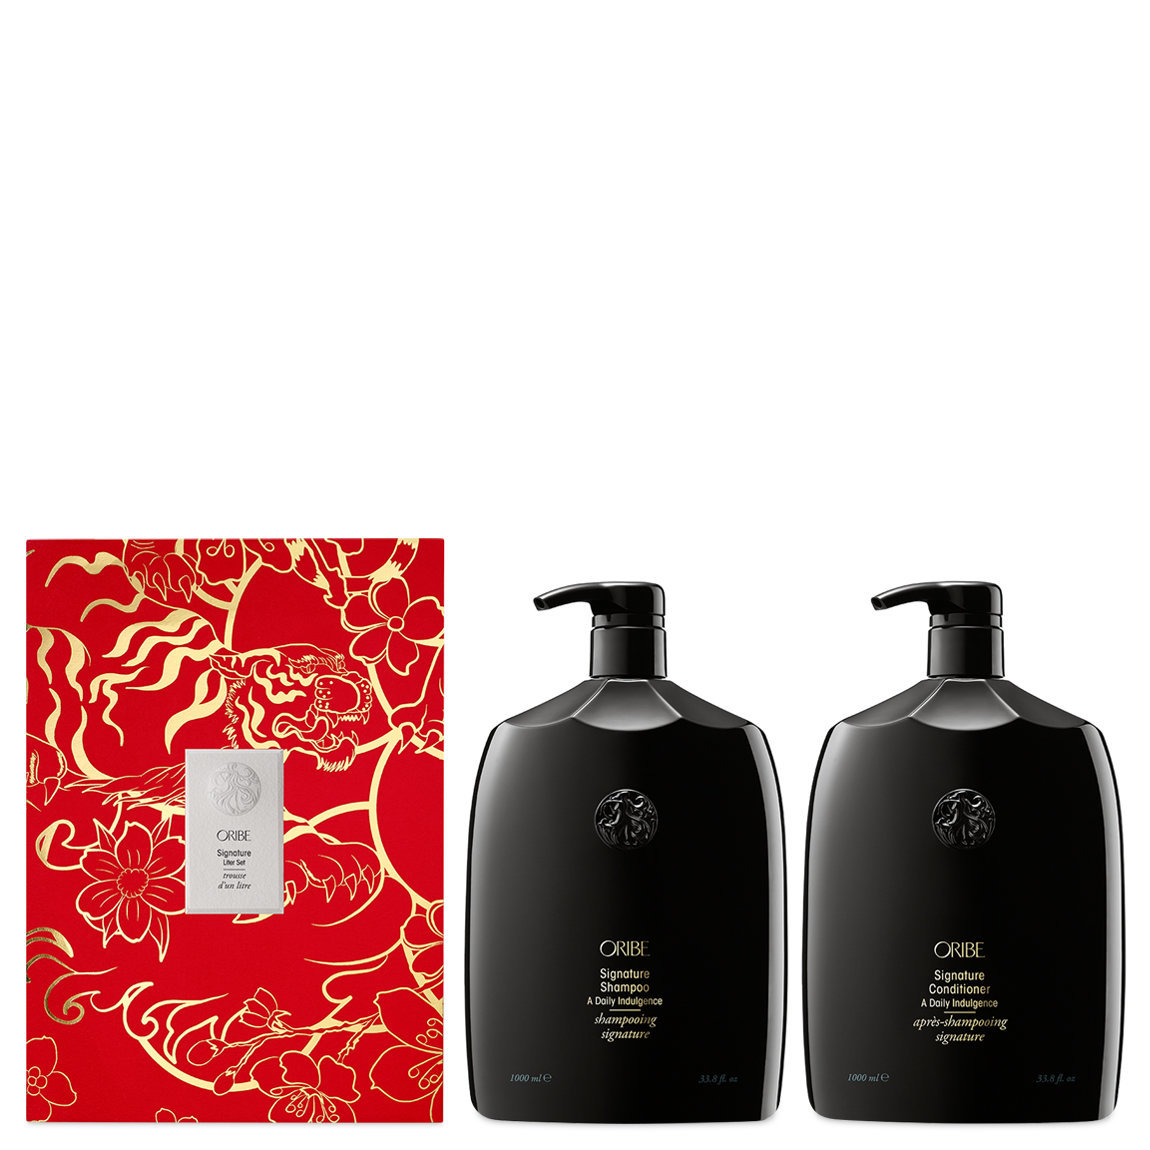 Oribe Lunar New Year Signature Liter Set alternative view 1 - product swatch.